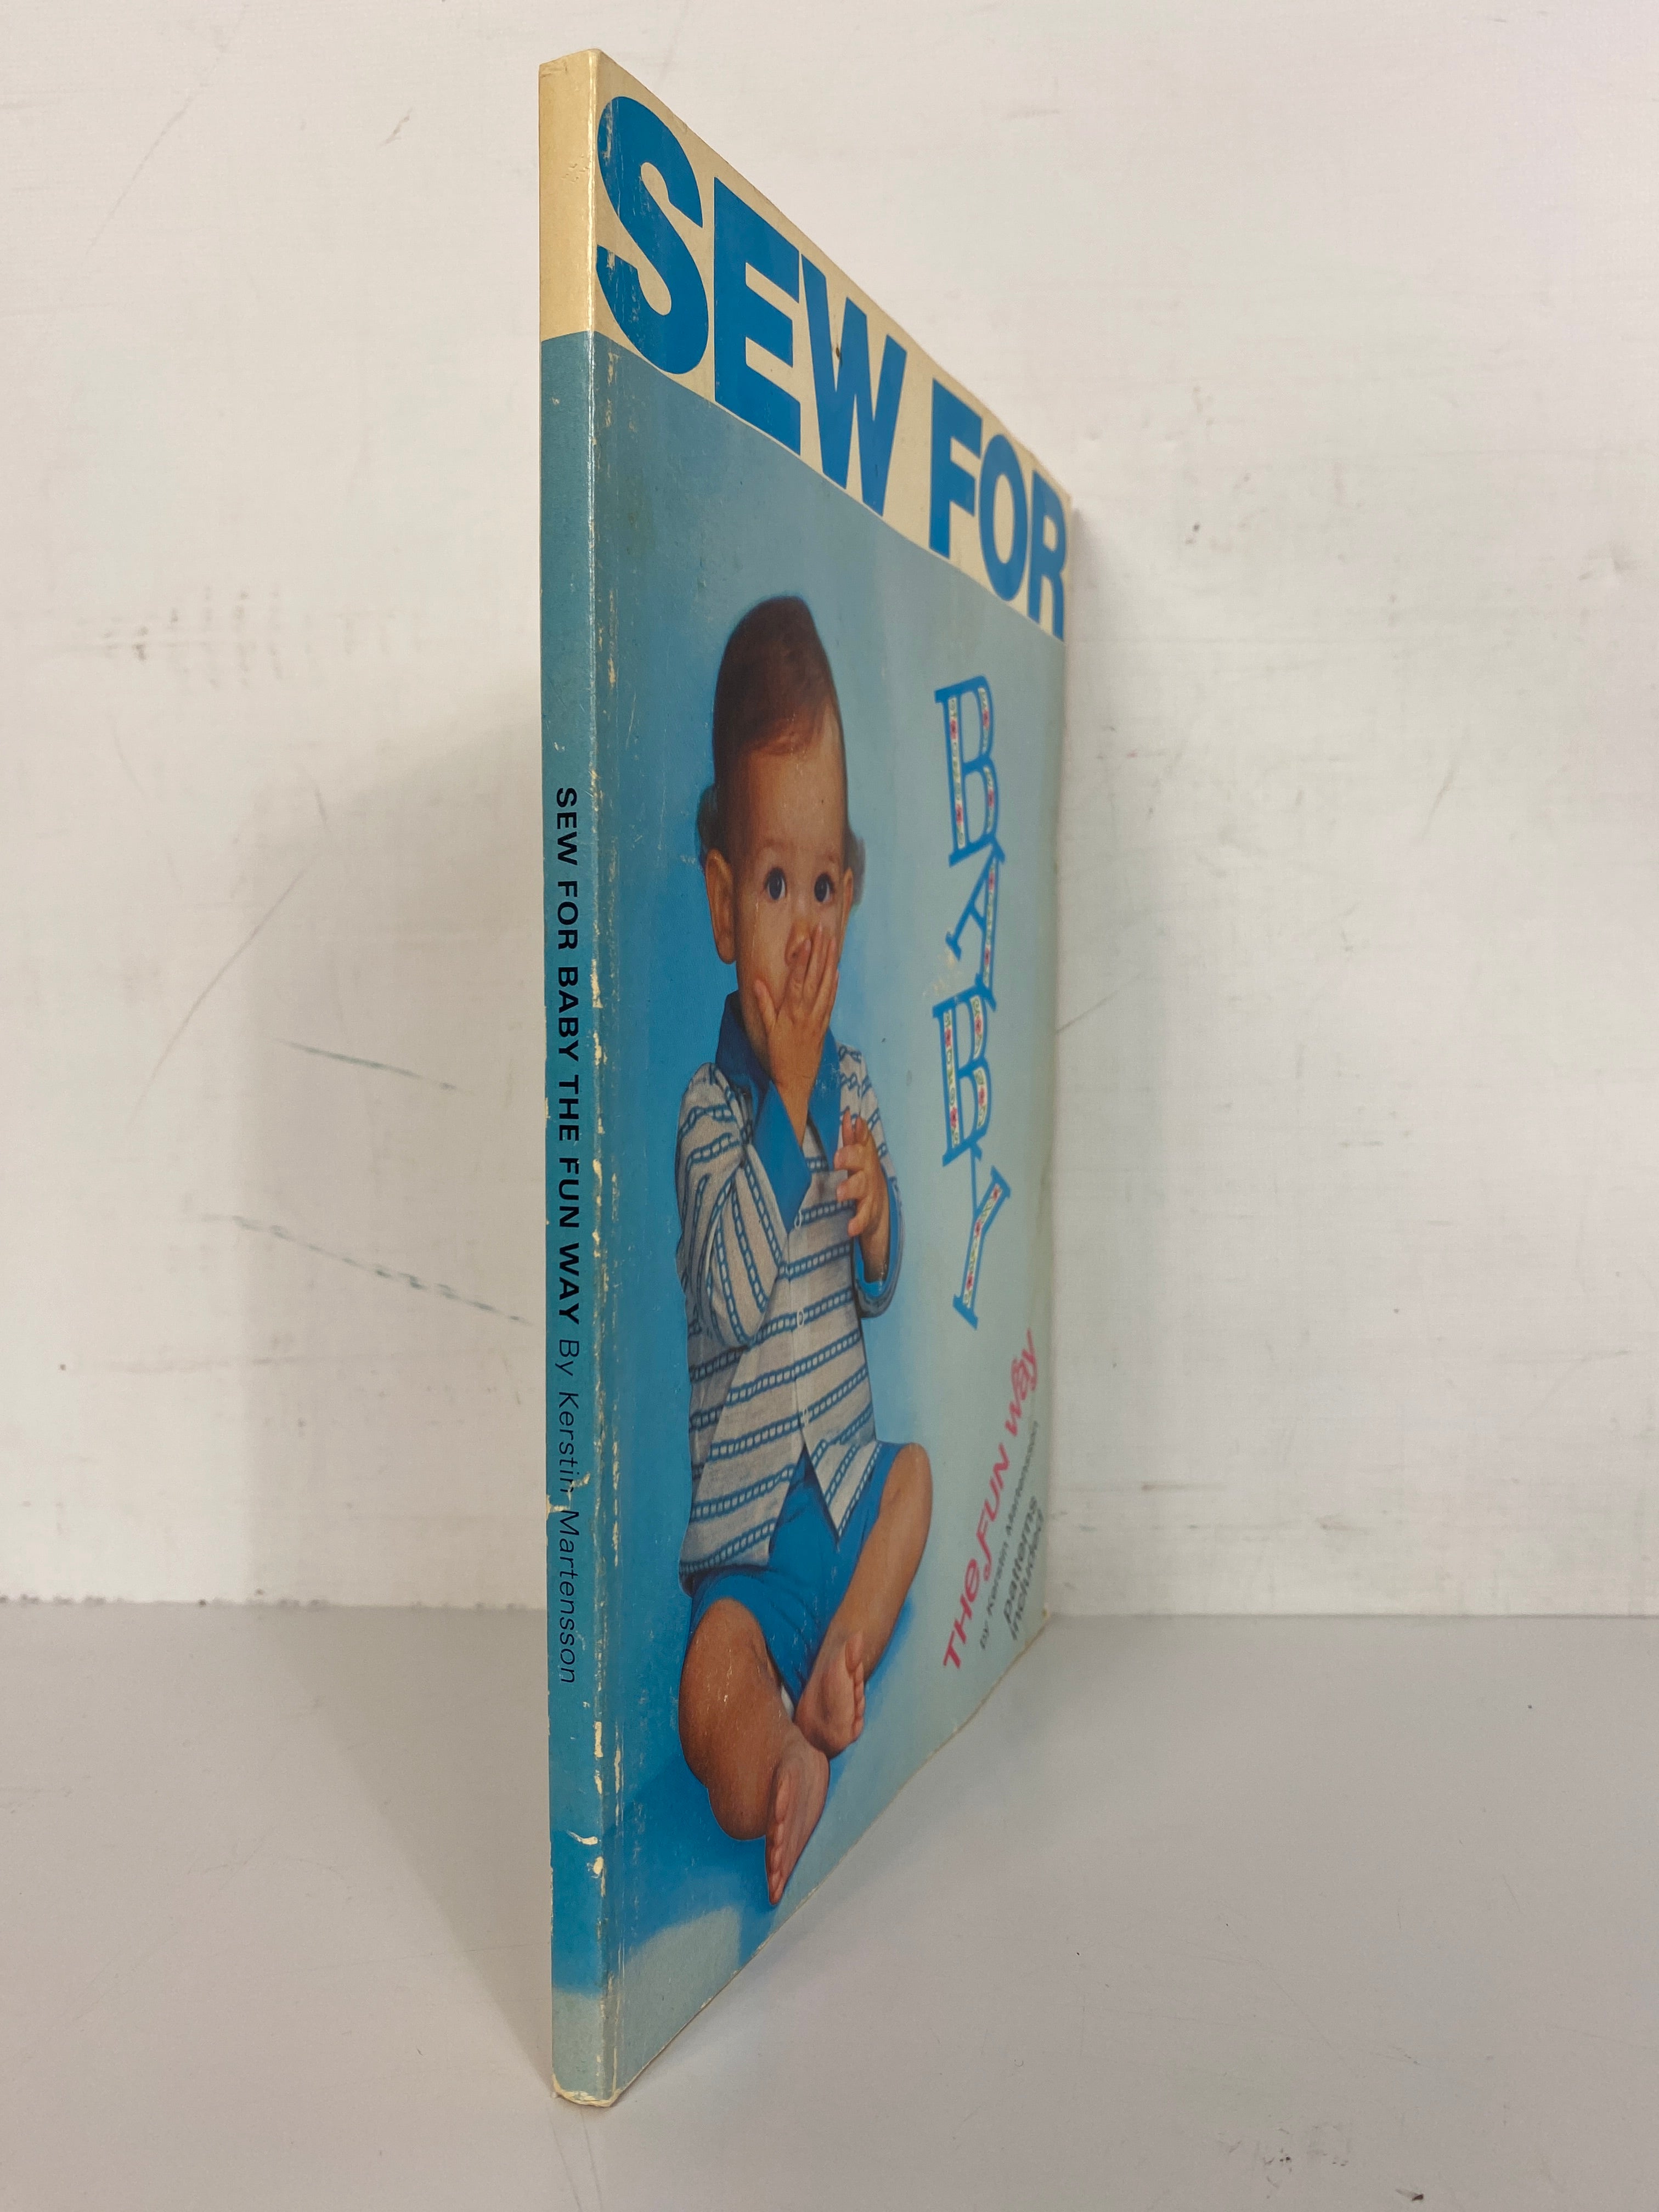 Sew for Baby The Fun Way by Kerstin Martensson With Pattern 1974 SC